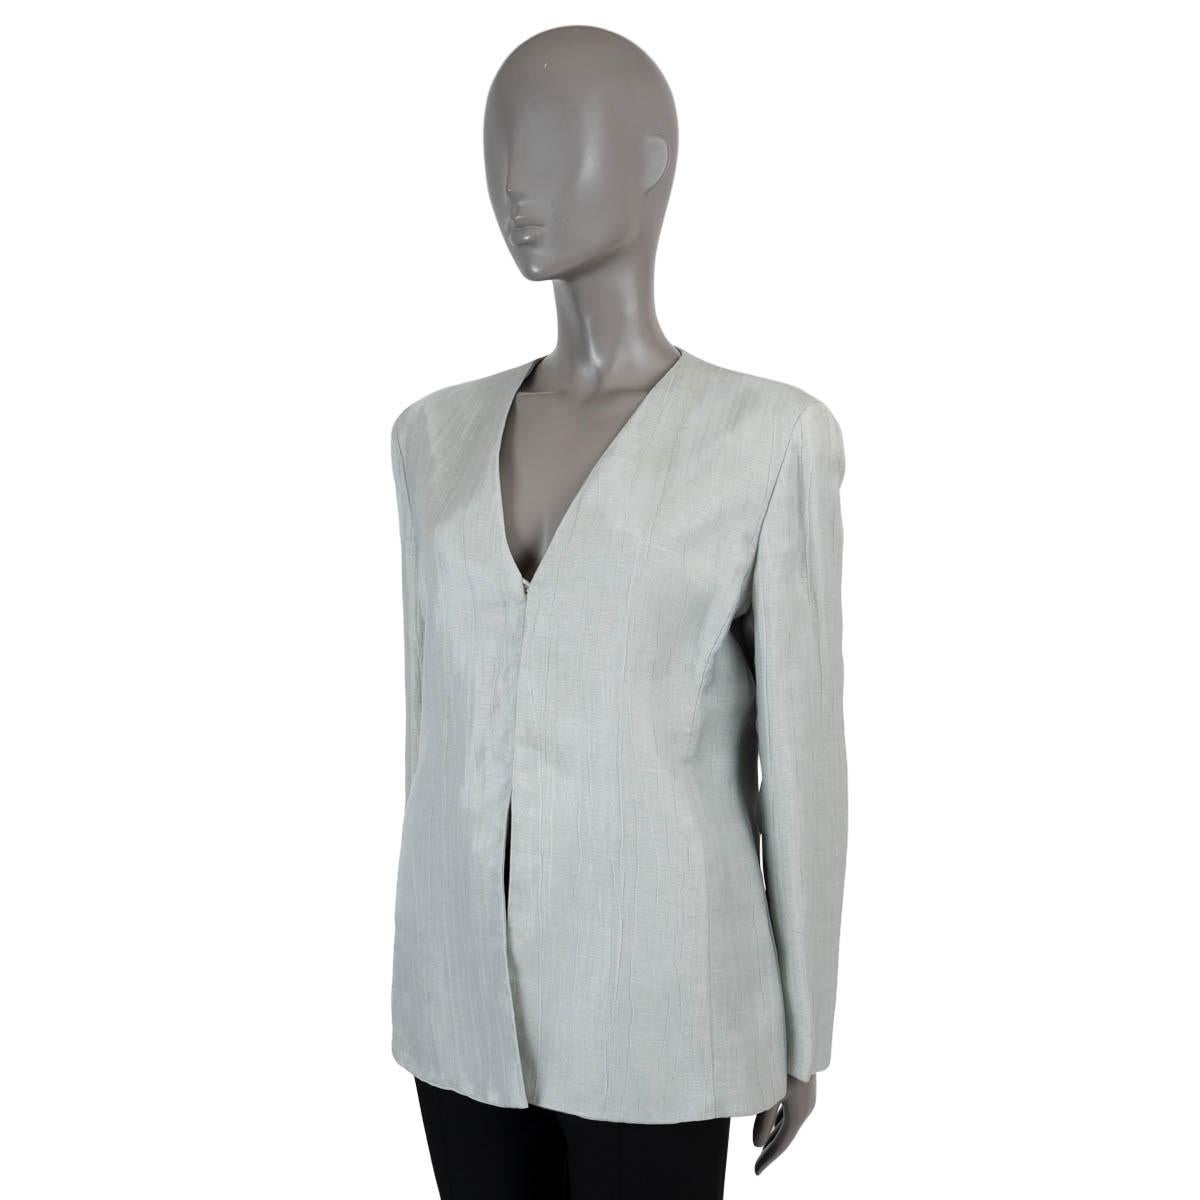 GIORGIO ARMANI mint green linen TEXTURED SHINY Blazer Jacket 46 XL In Excellent Condition For Sale In Zürich, CH